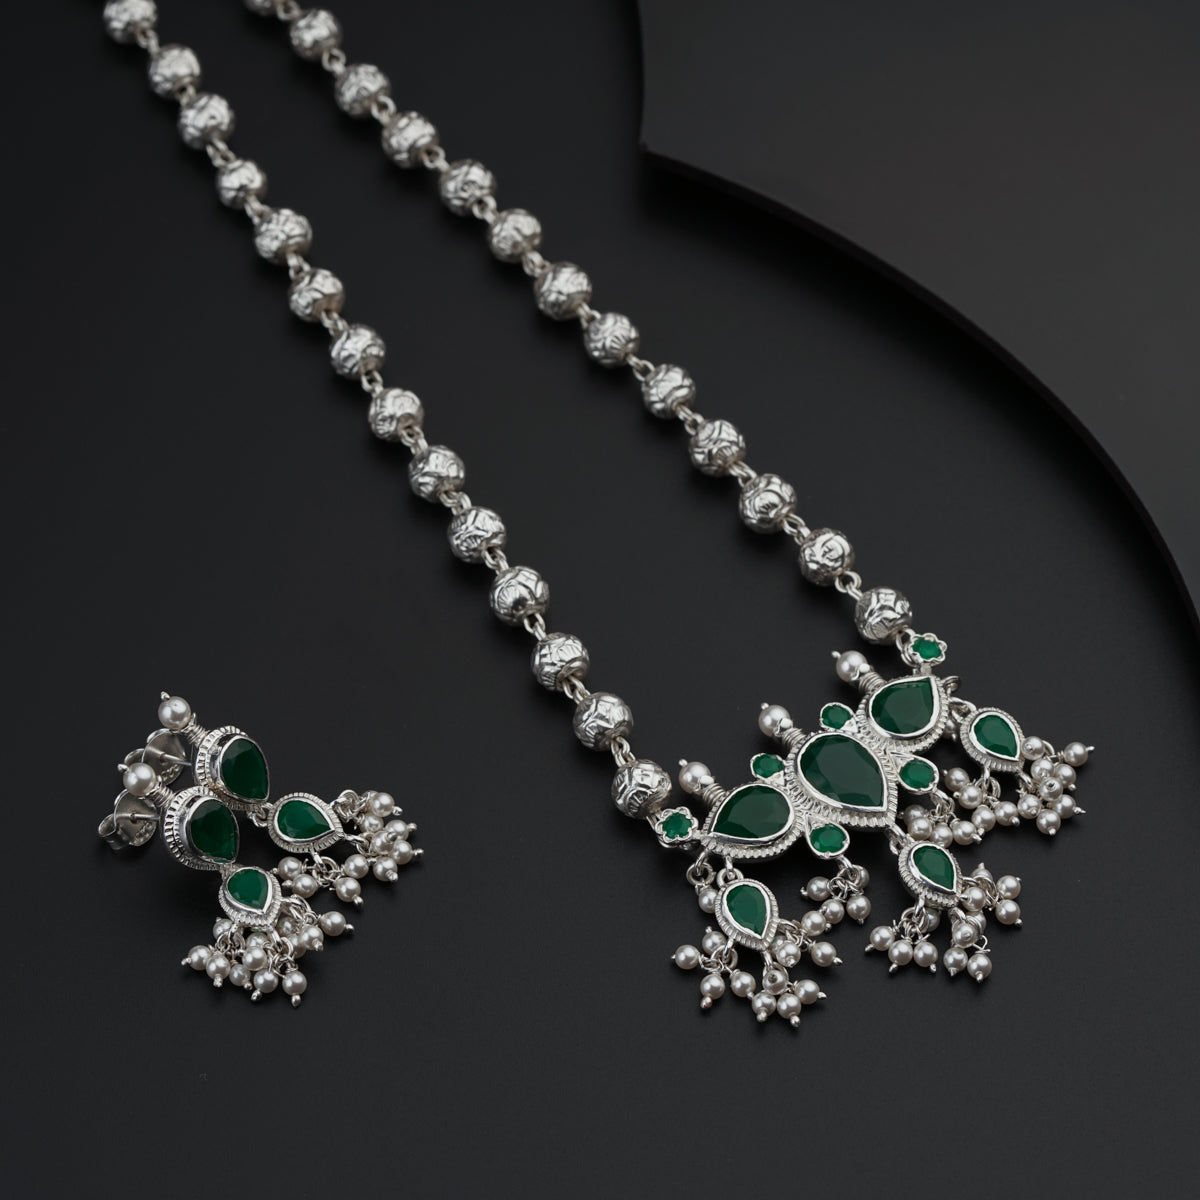 a green and white necklace and earrings on a black surface